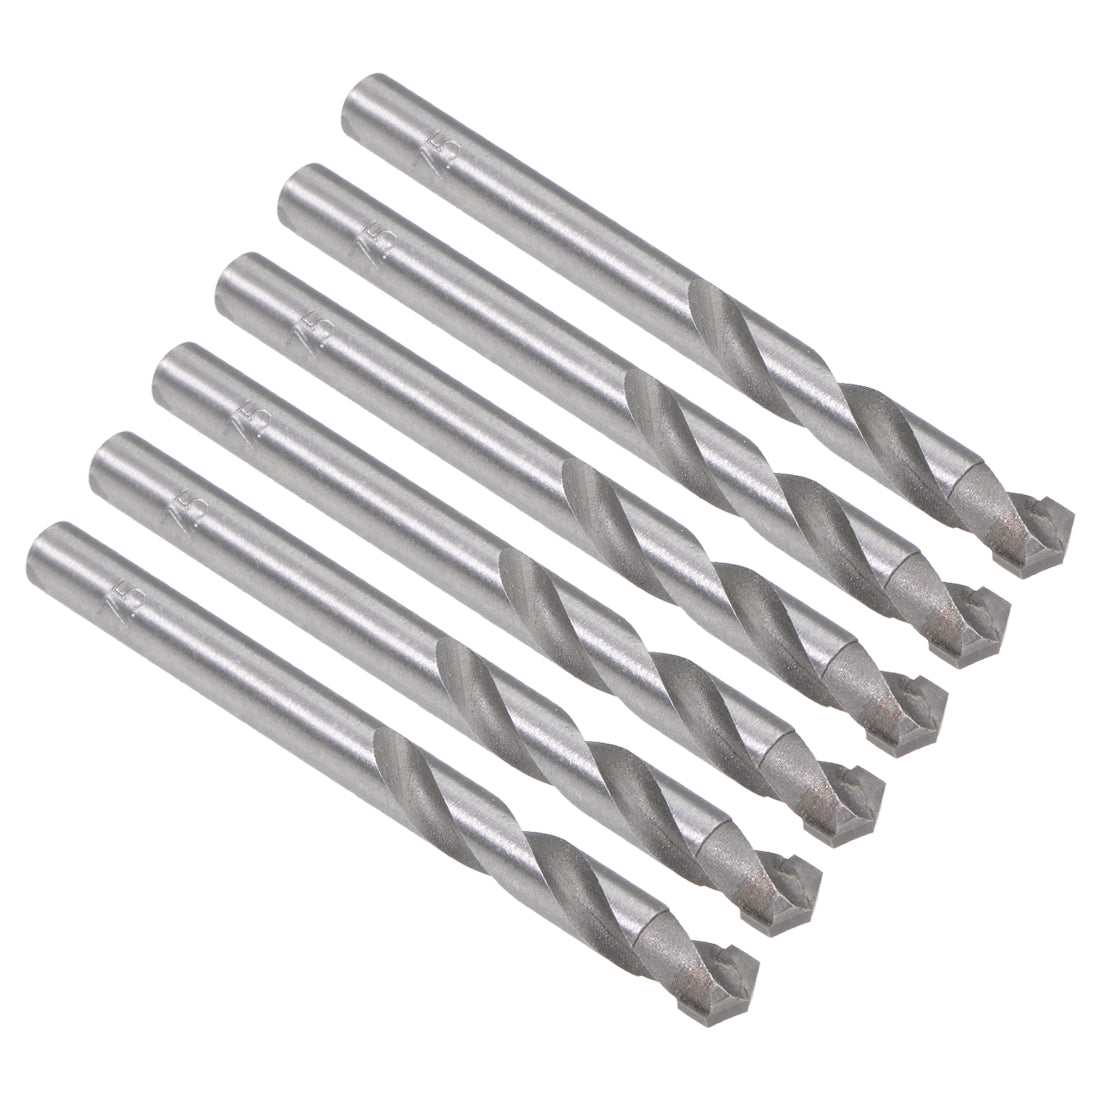 uxcell Uxcell 7.5mm Cemented Carbide Twist Drill Bits for Stainless Steel Copper Aluminum 6Pcs